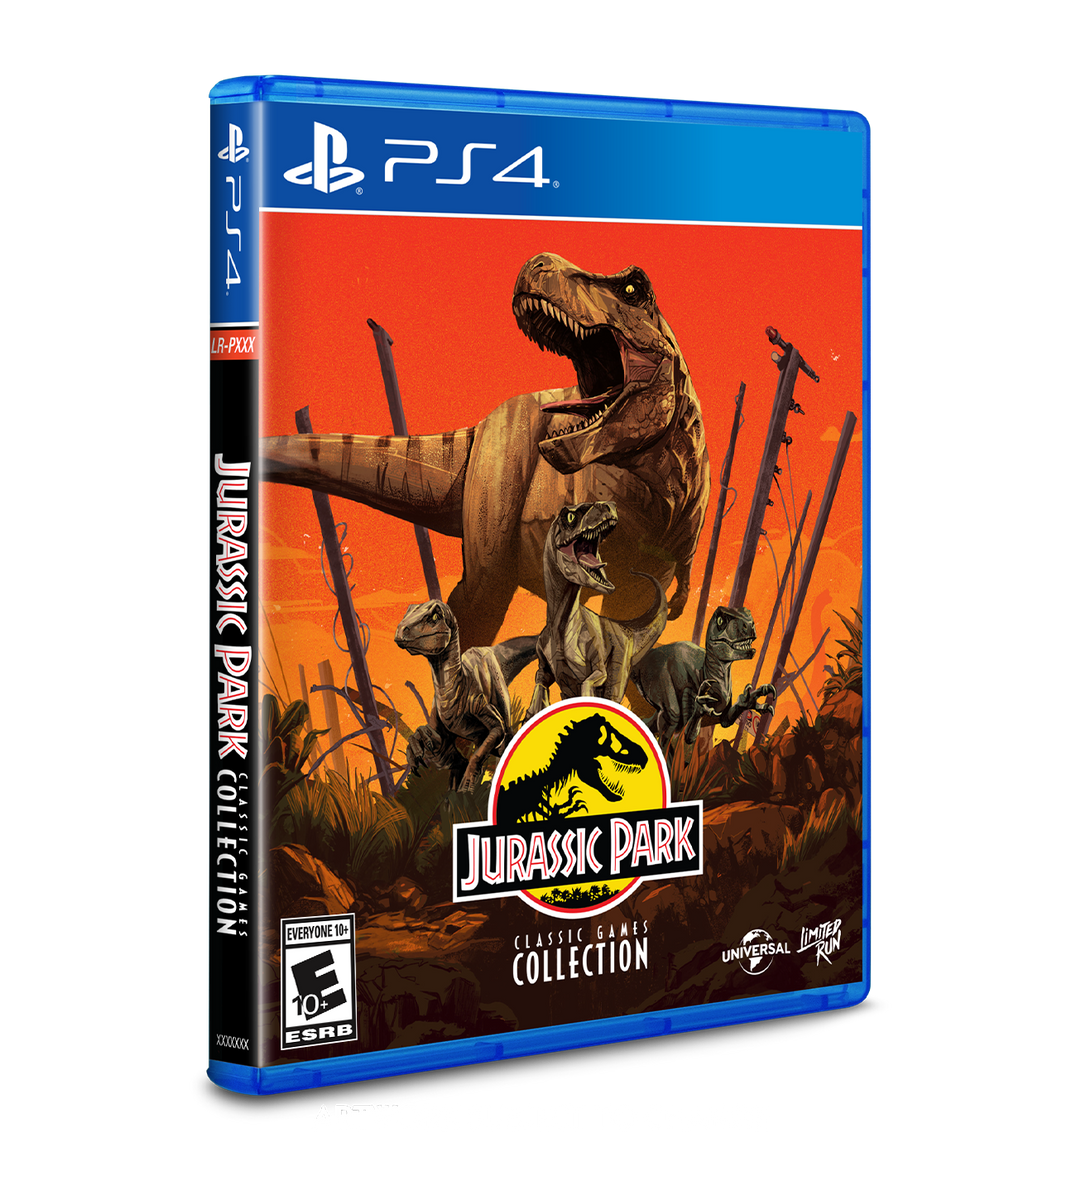 Games Park: Limited Jurassic (PS4) Games Run Collection – Classic